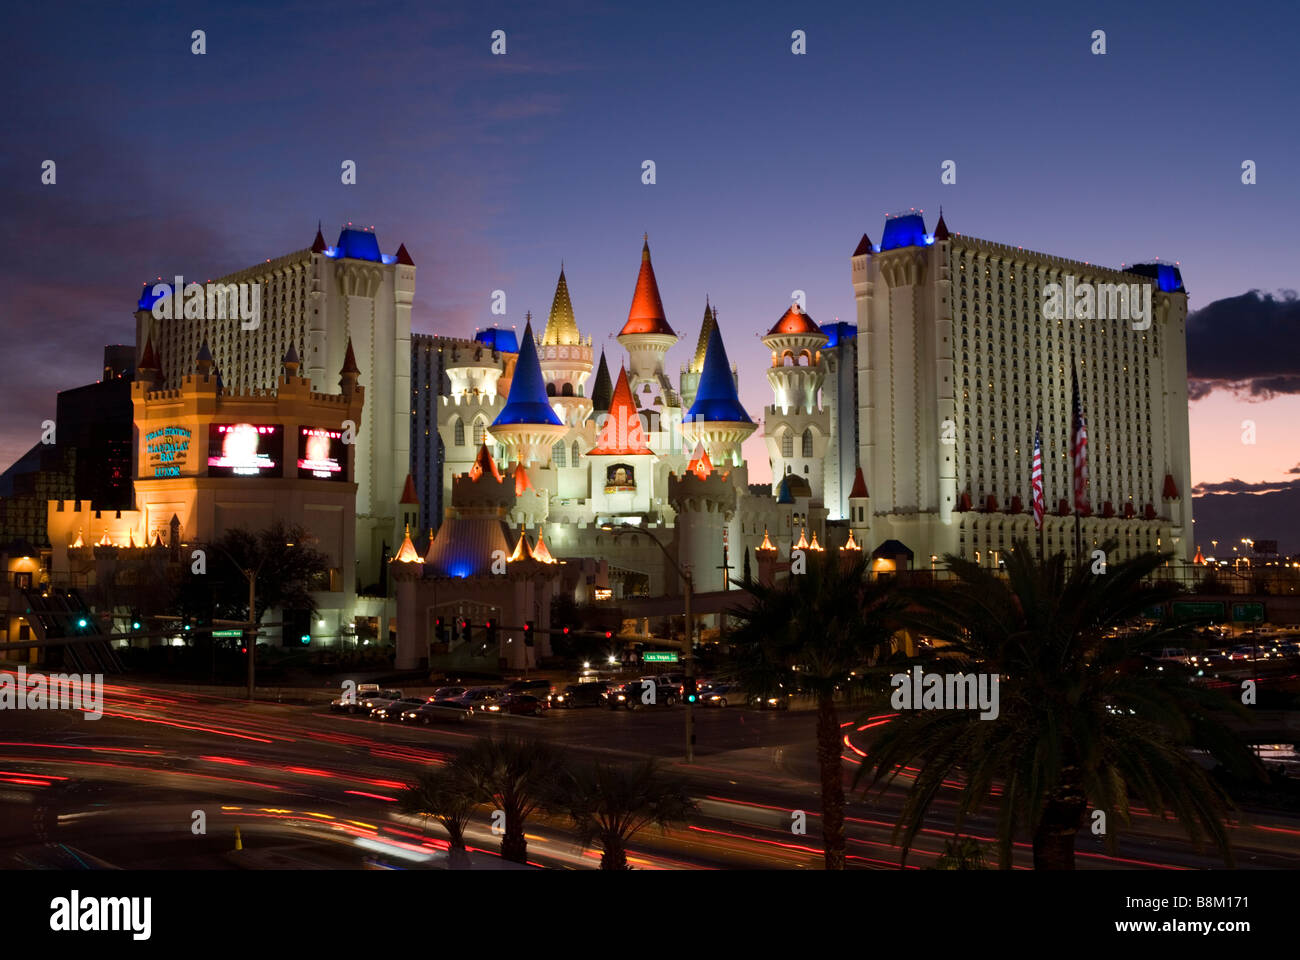 The Excalibur Hotel and casino at dusk on the Las Vegas strip, Nevada, USA Stock Photo